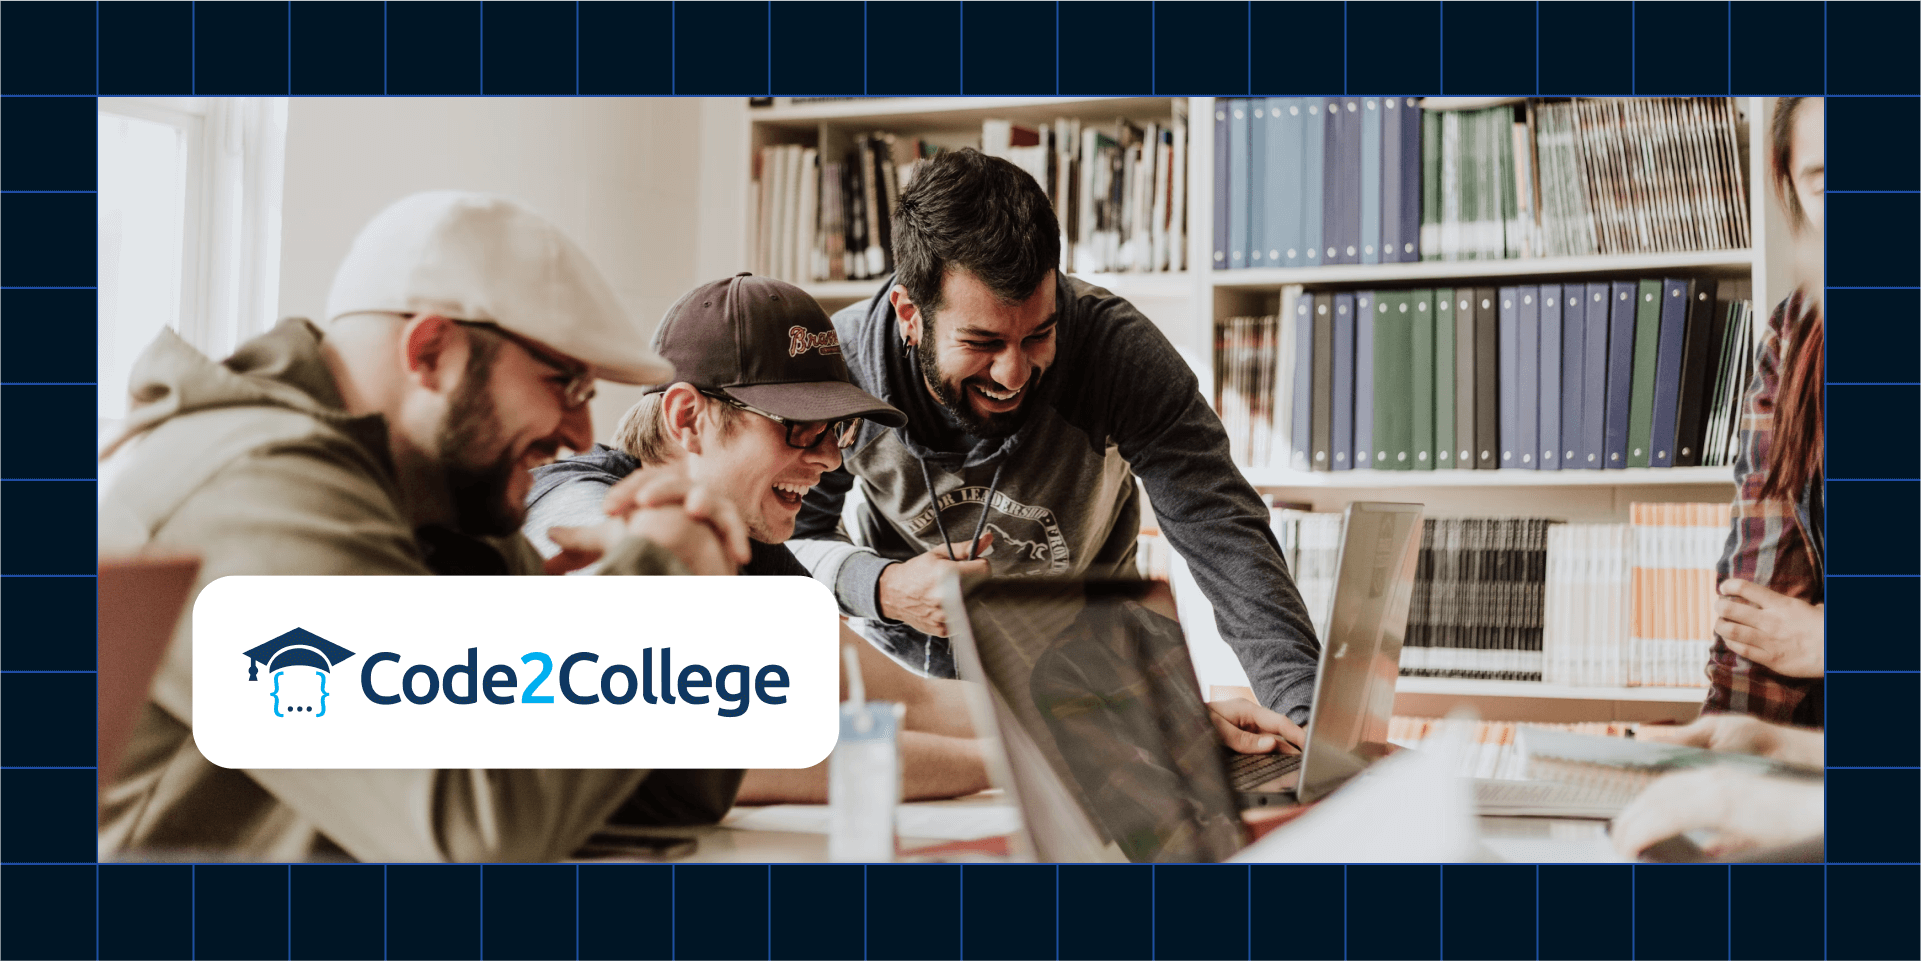 Code2College leverages data to give students more voice